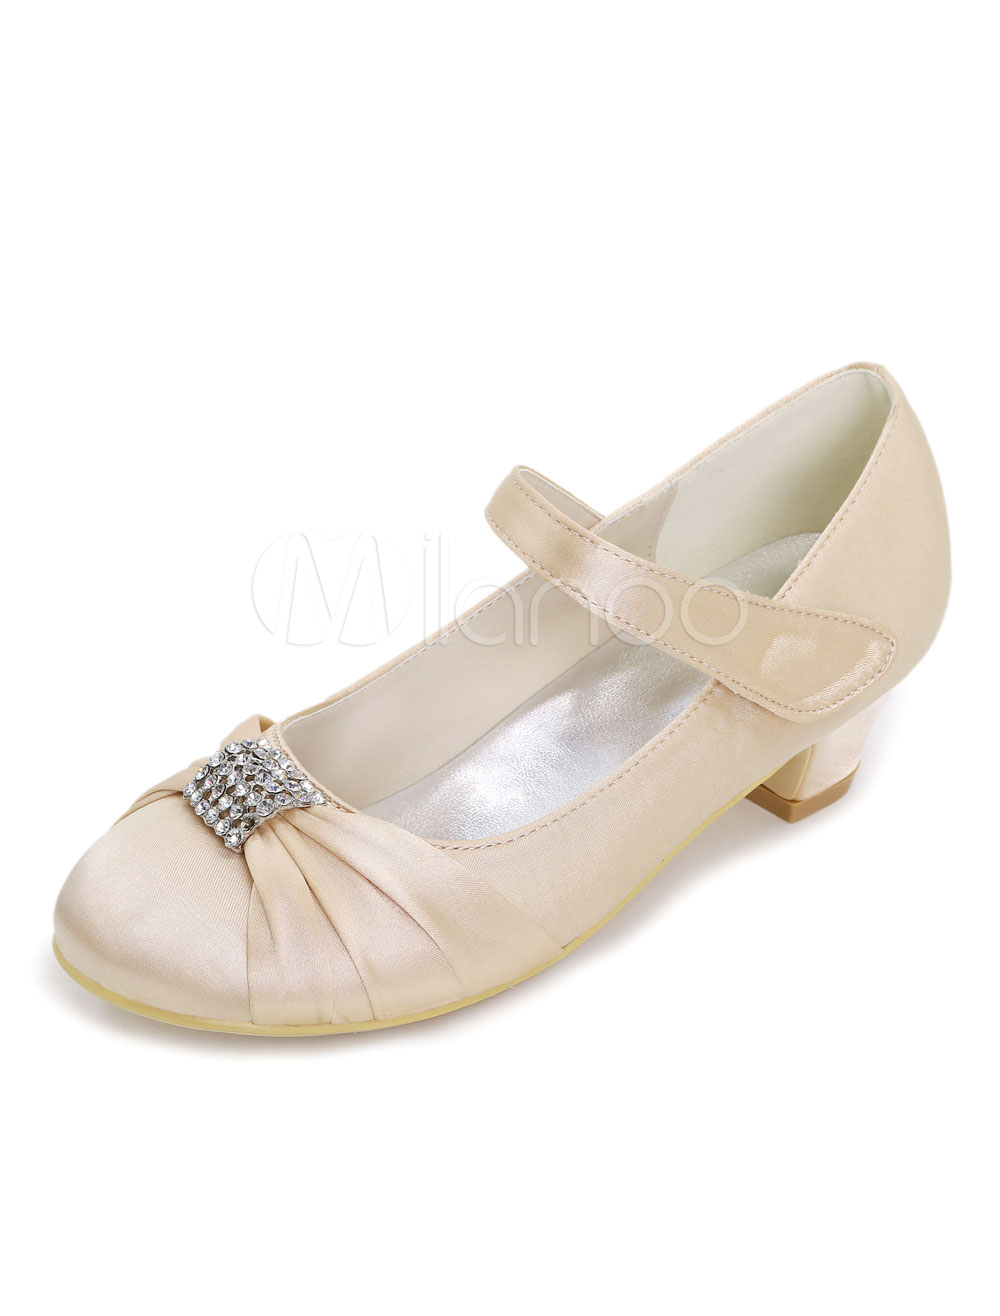 champagne shoes for flower girl